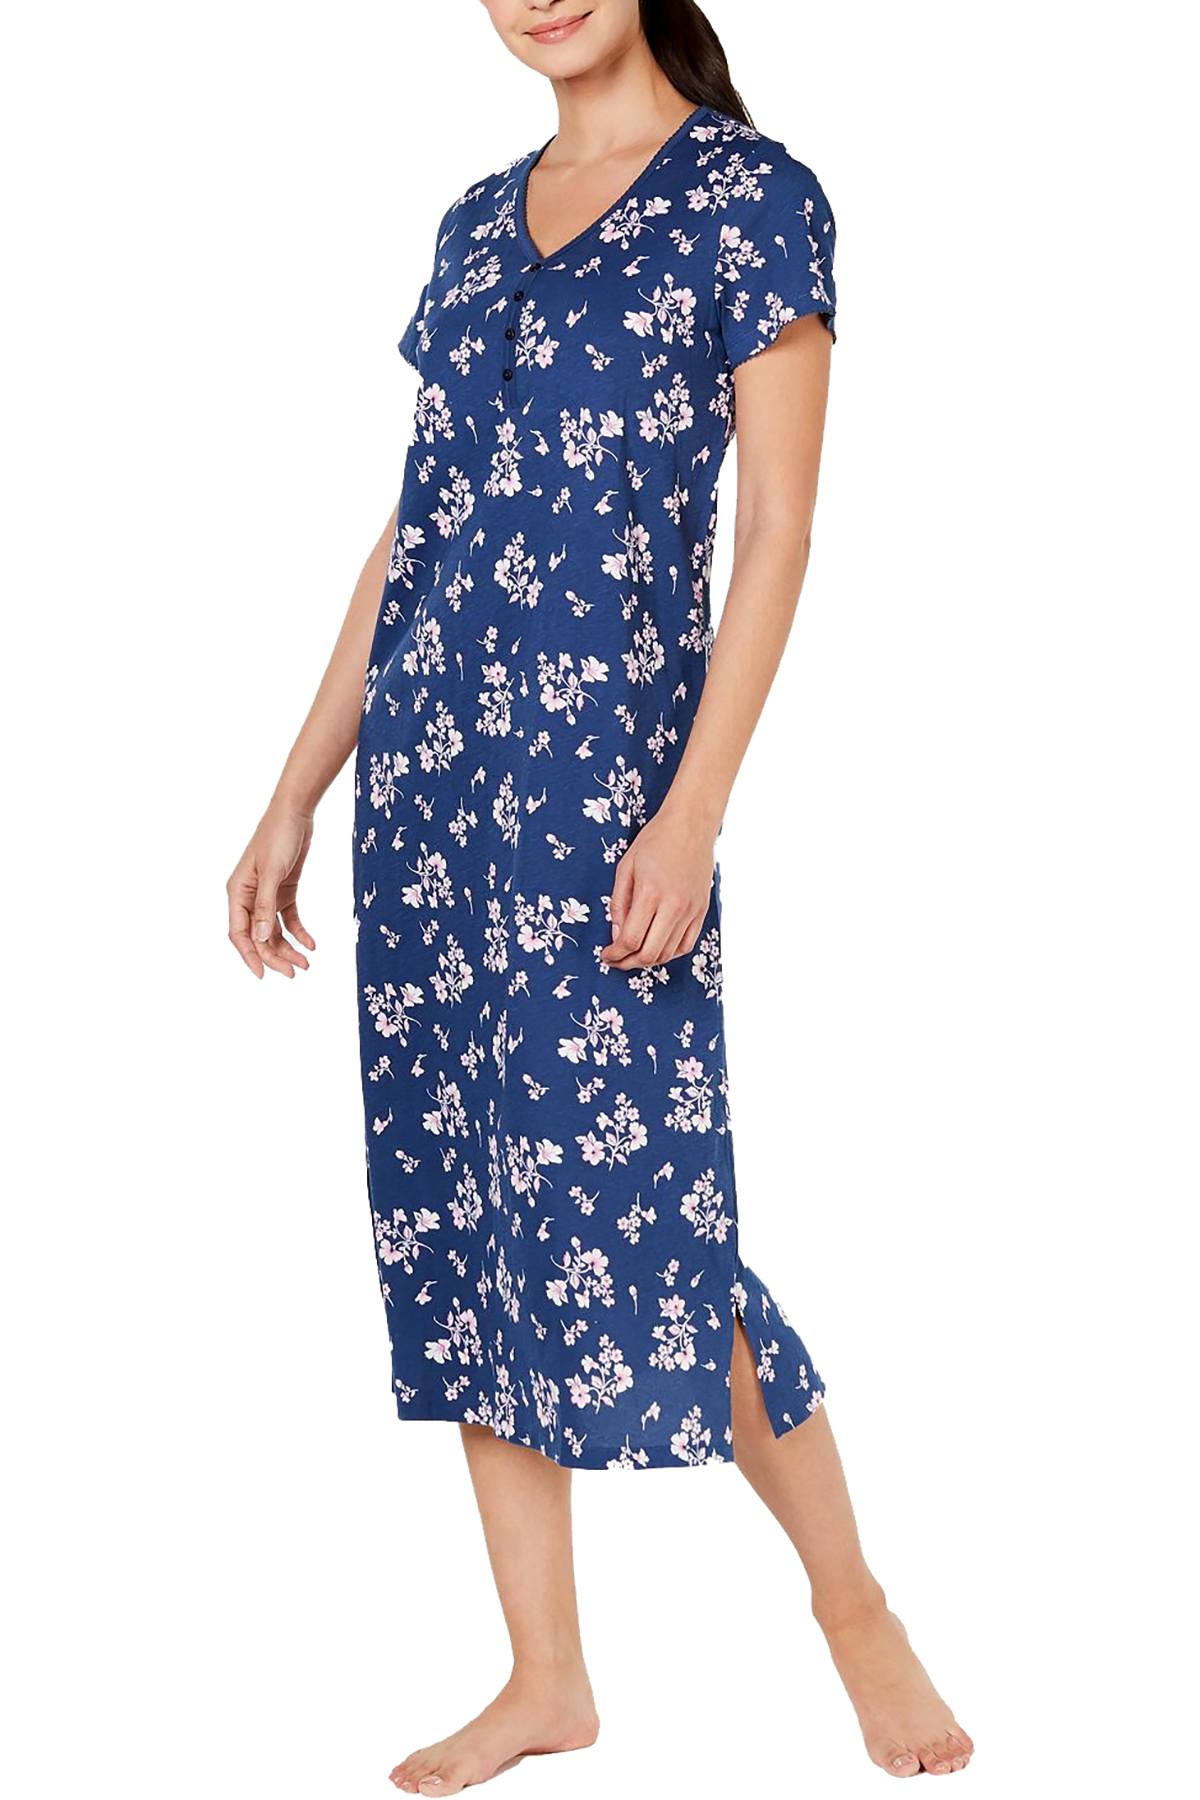 Charter Club Printed Soft Knit Cotton Nightgown in Blue Bells